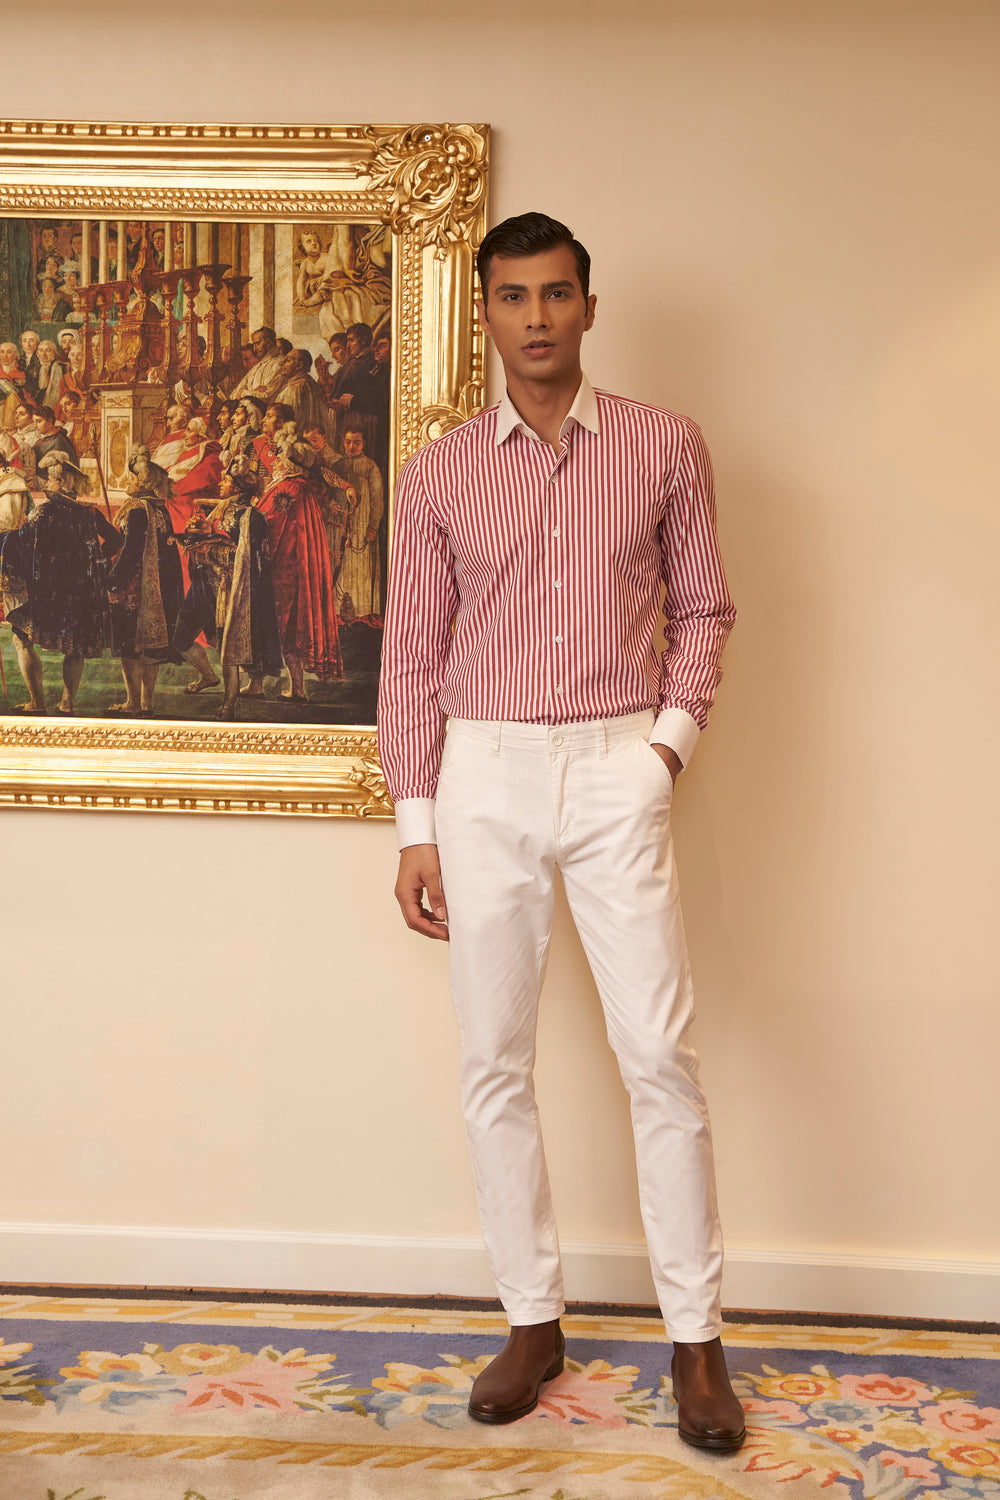 What color shirt goes well with white pants for men? - Quora